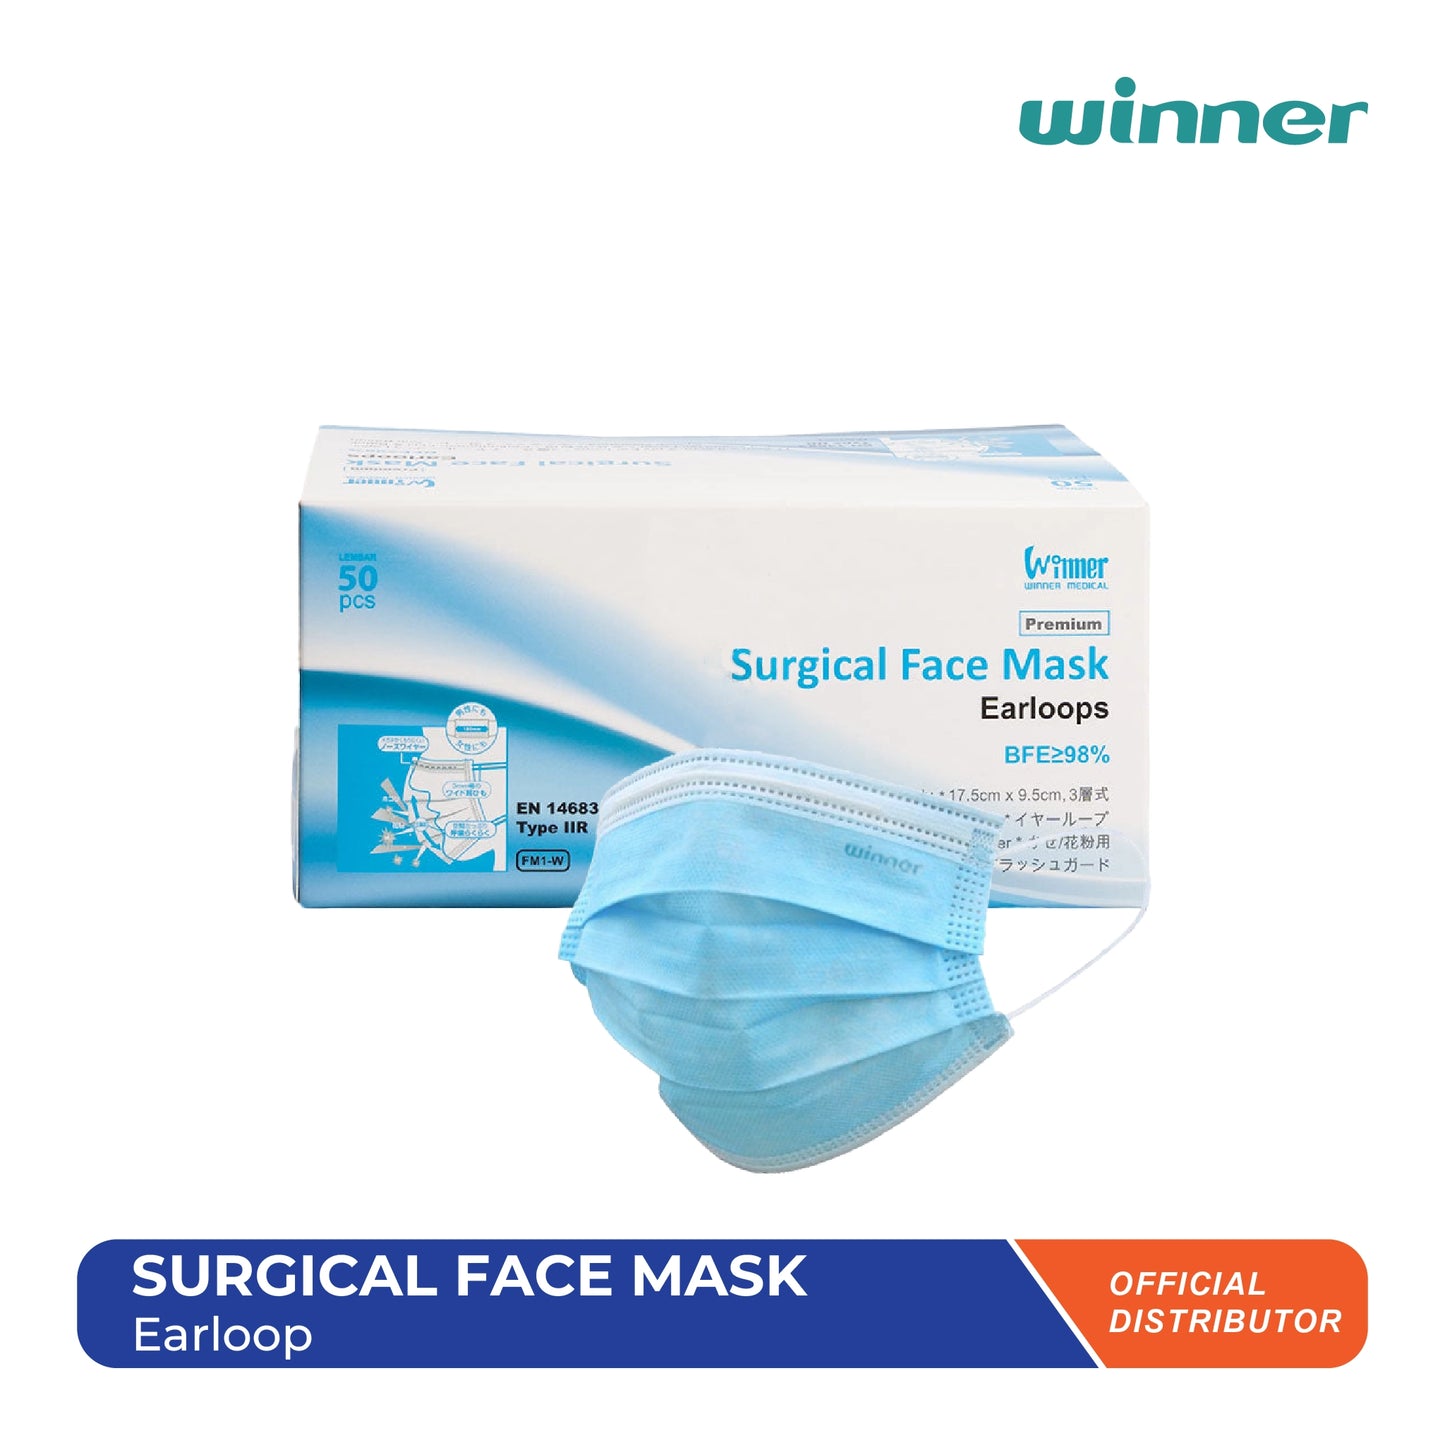 Surgical Face Mask Earloop